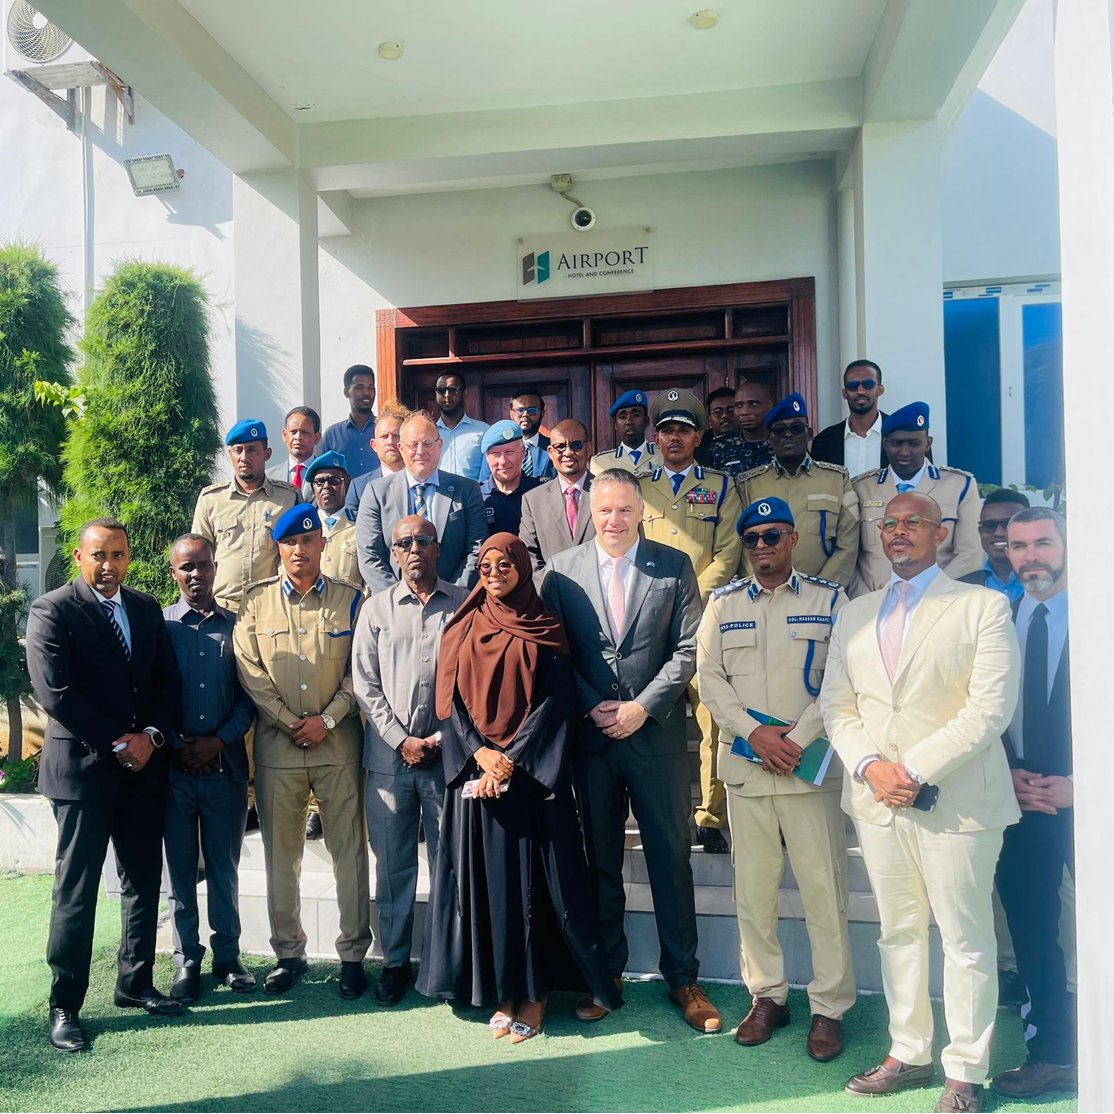 Constantly improving justice sector systems helps to achieve long-term stability. @US2SOMALIA is proud to support the new Somalia Criminal Investigation Program (SOMCIP), funded through @StateINL and implemented by @IDLO. SOMCIP will train over 400 federal and state investigators